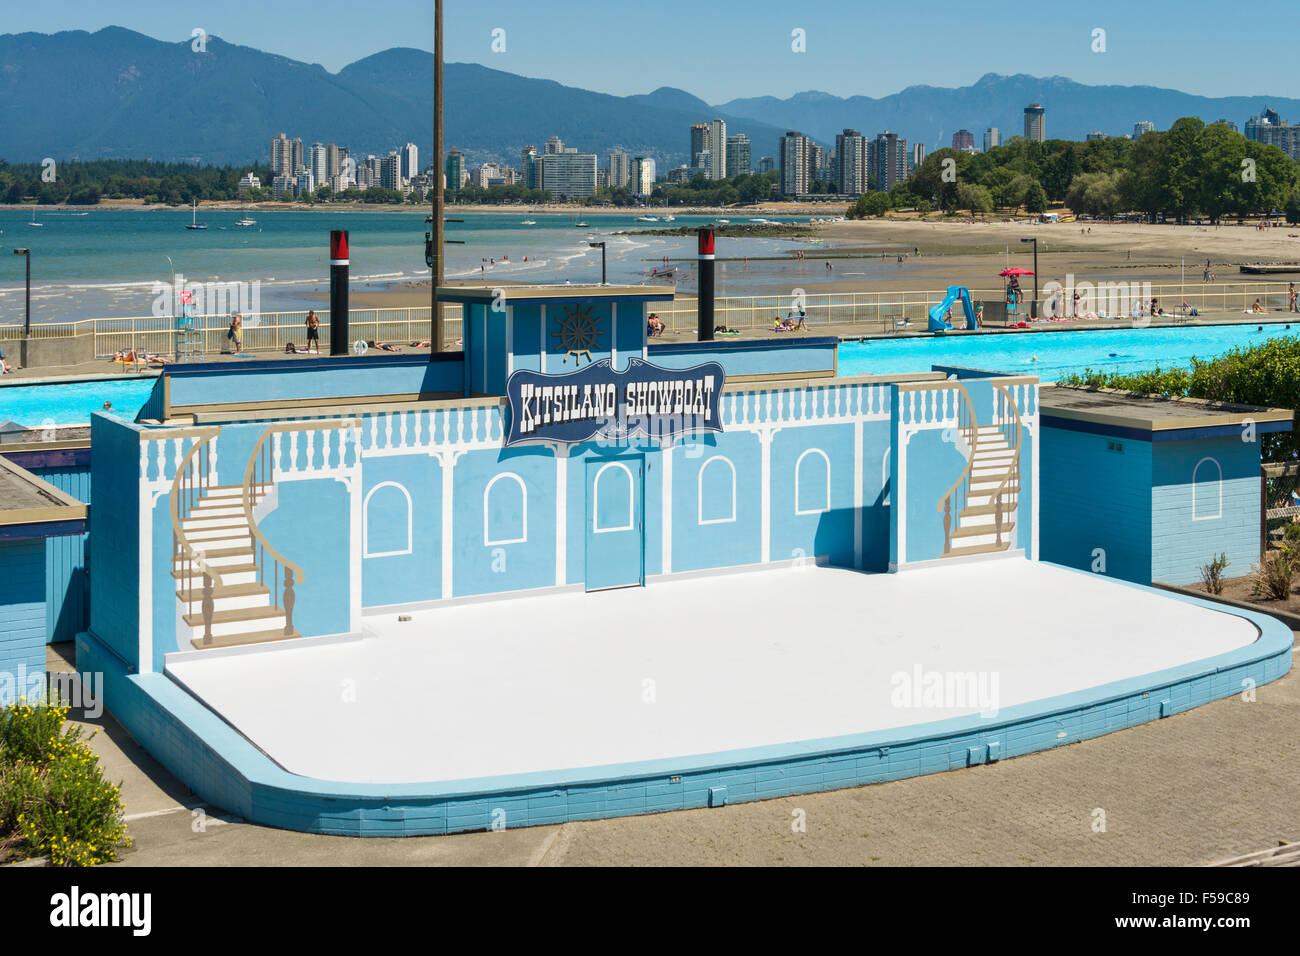 Kitsilano Showboat, at Kitsilano Beach, Vancouver, is an open air amphitheatre. It hosts free performances in summer since 1935. Stock Photo